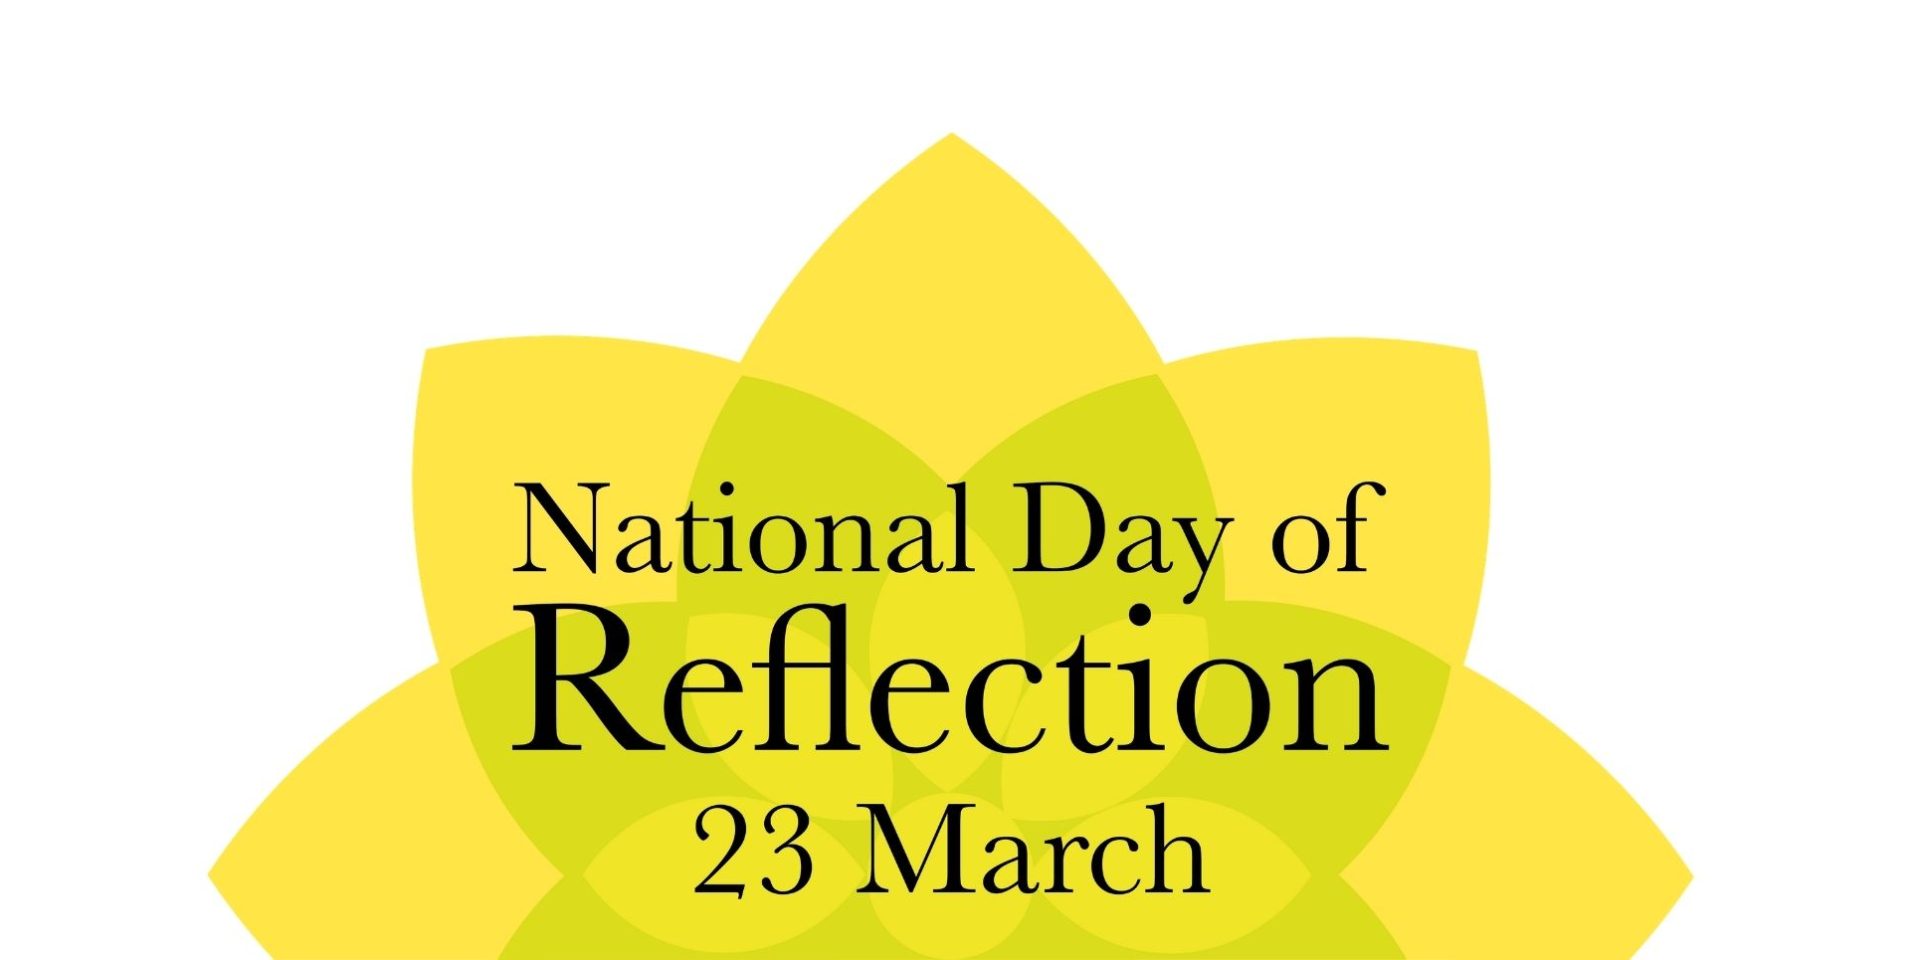 National Day of Reflection 2021